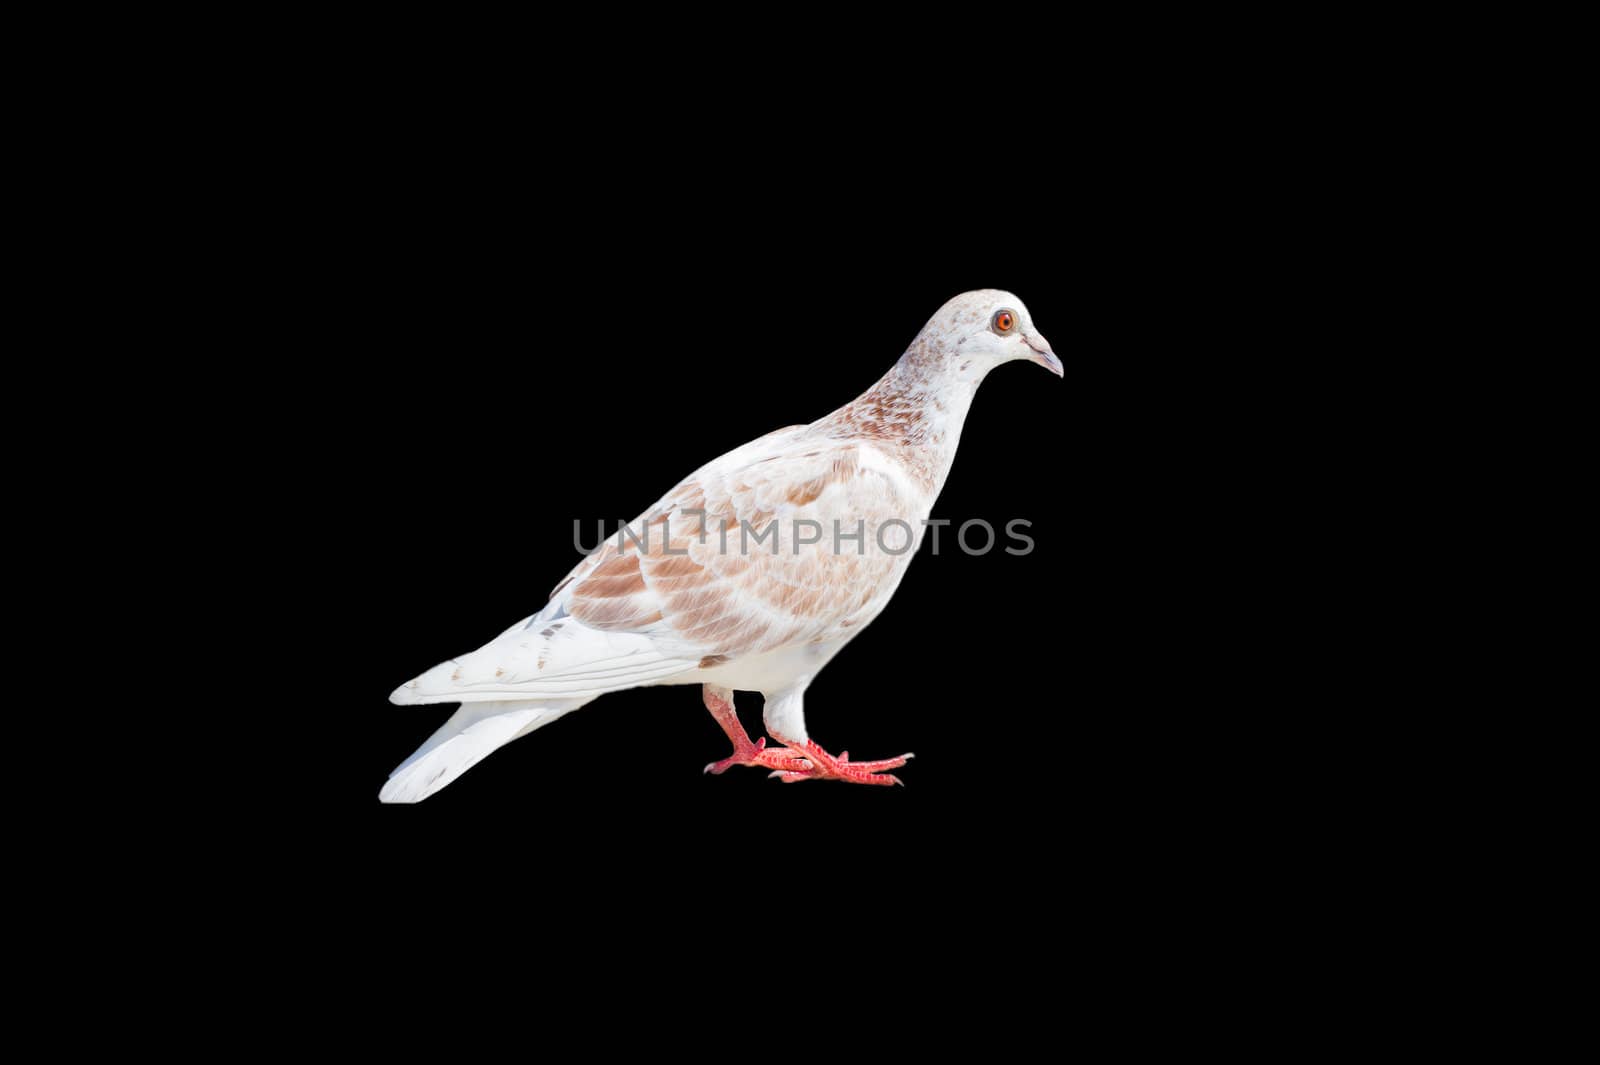 One white-brown pigeon isolated by photoroman